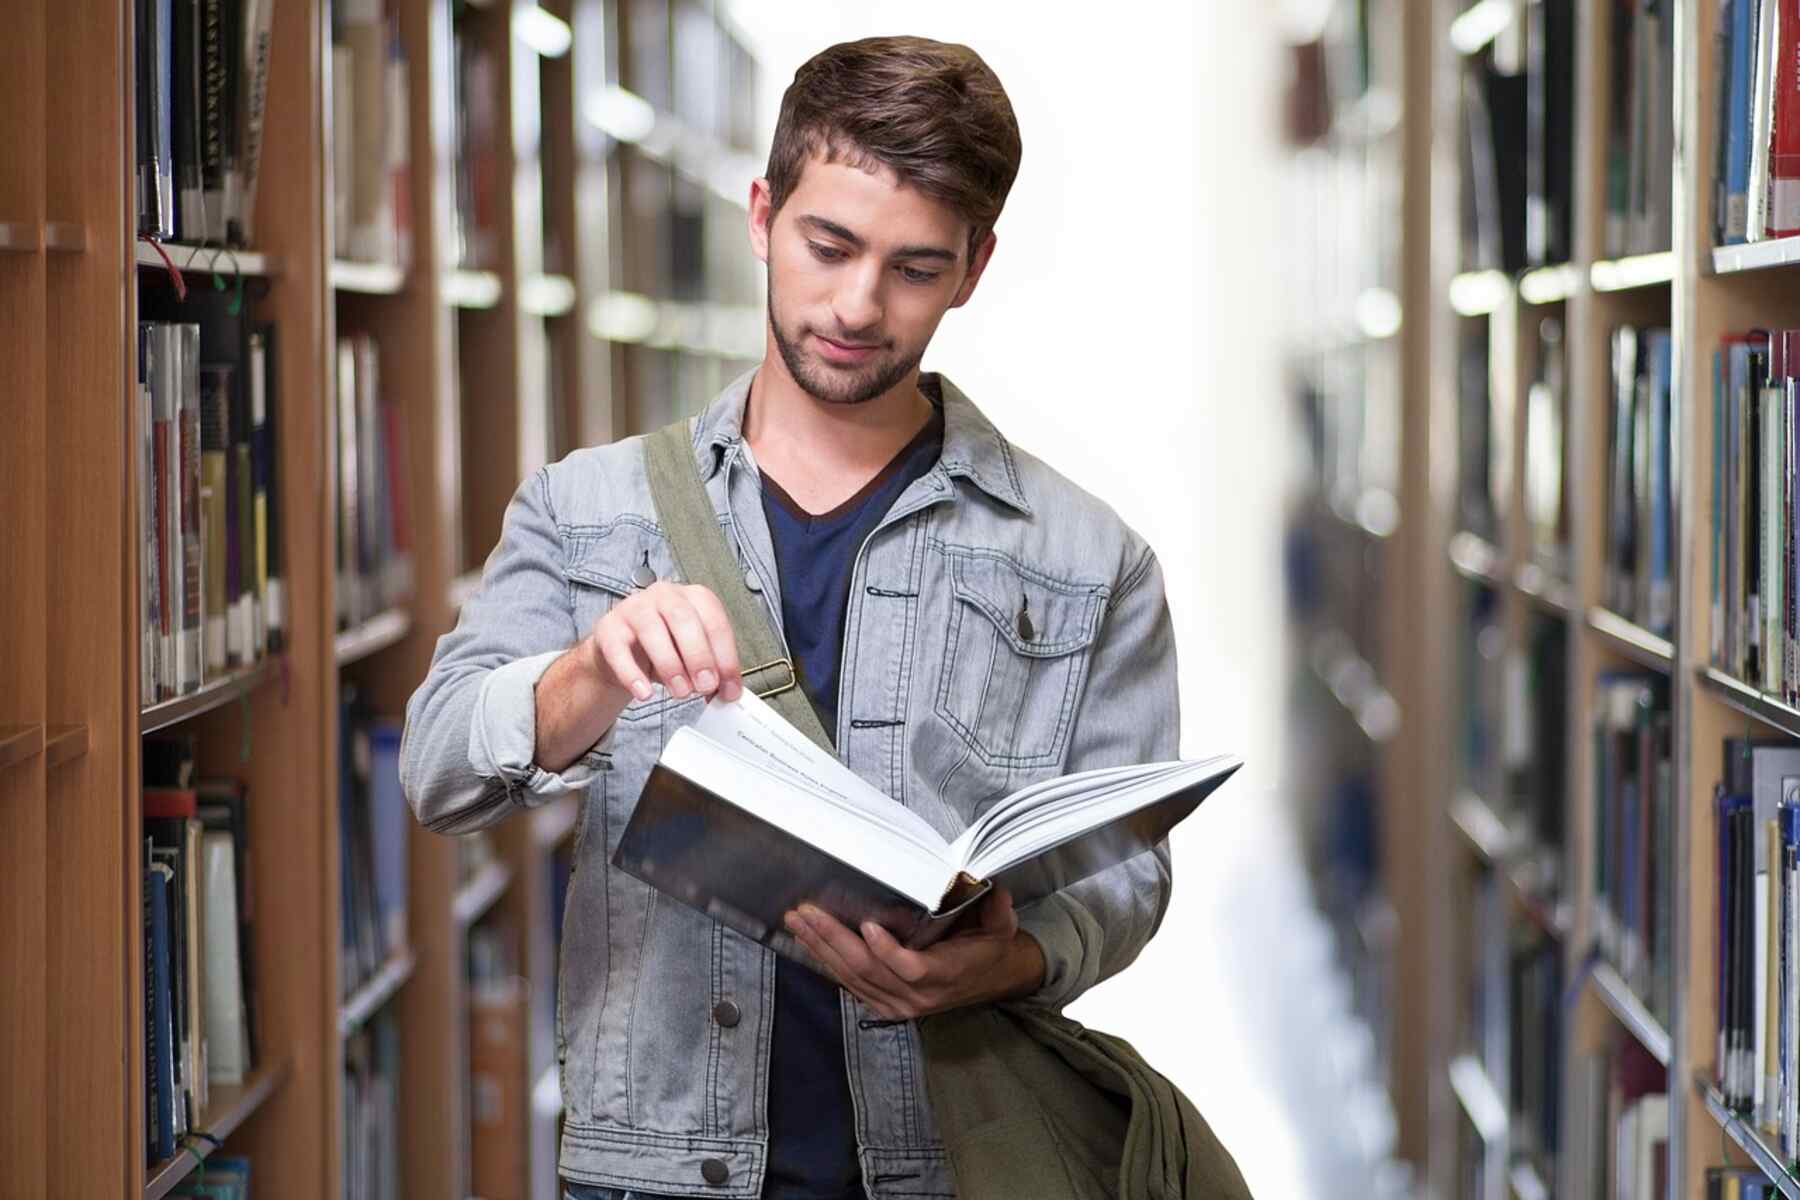 A male student reading a book at a library